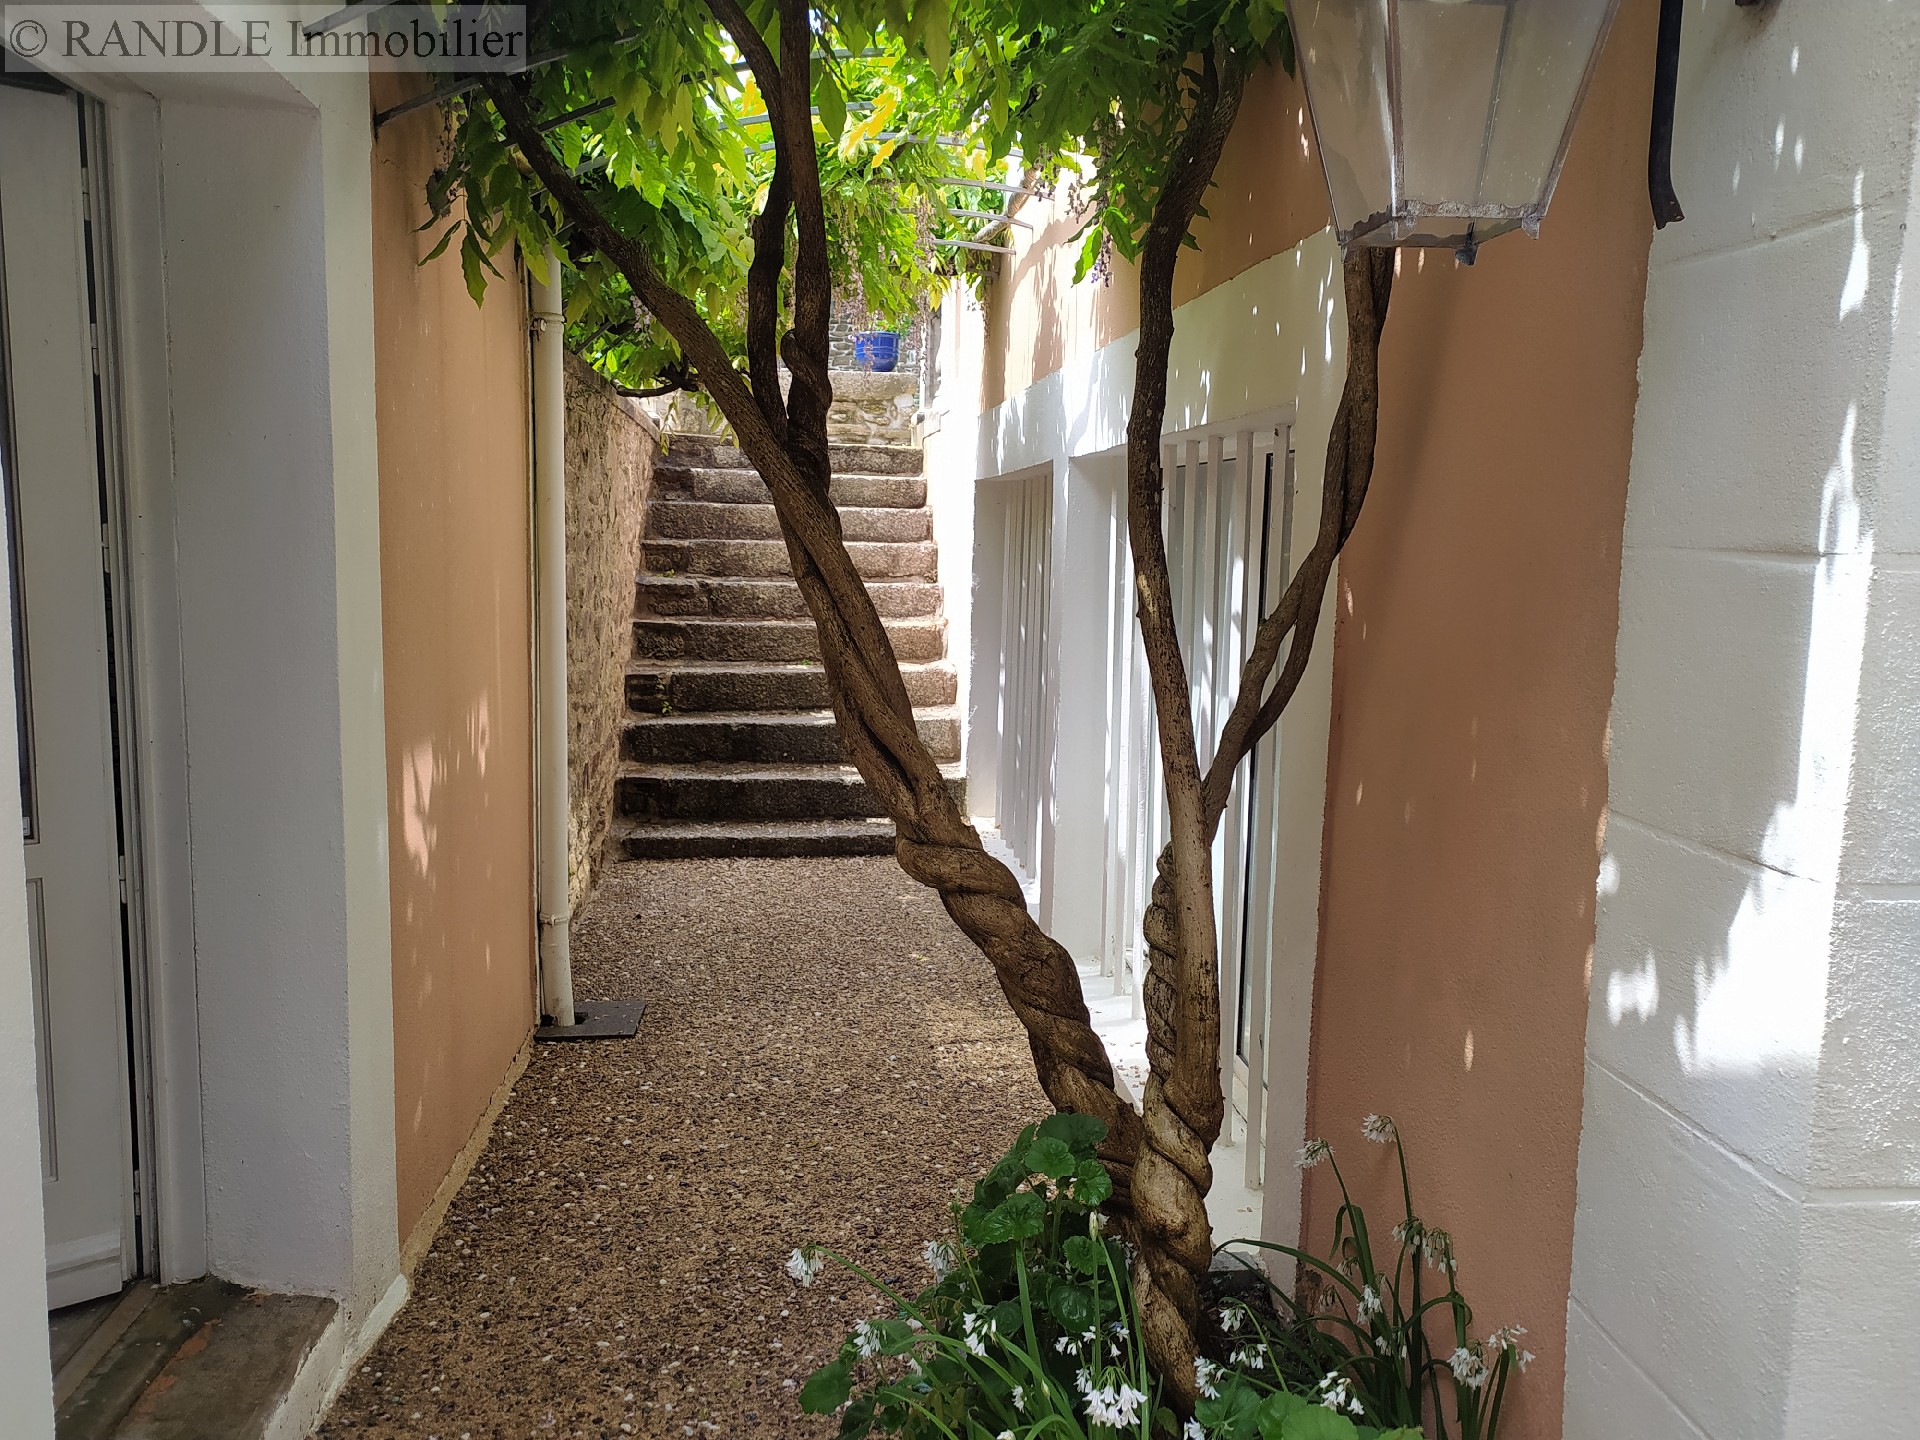 Sell city house - PONT AVEN 308 m², 10 rooms